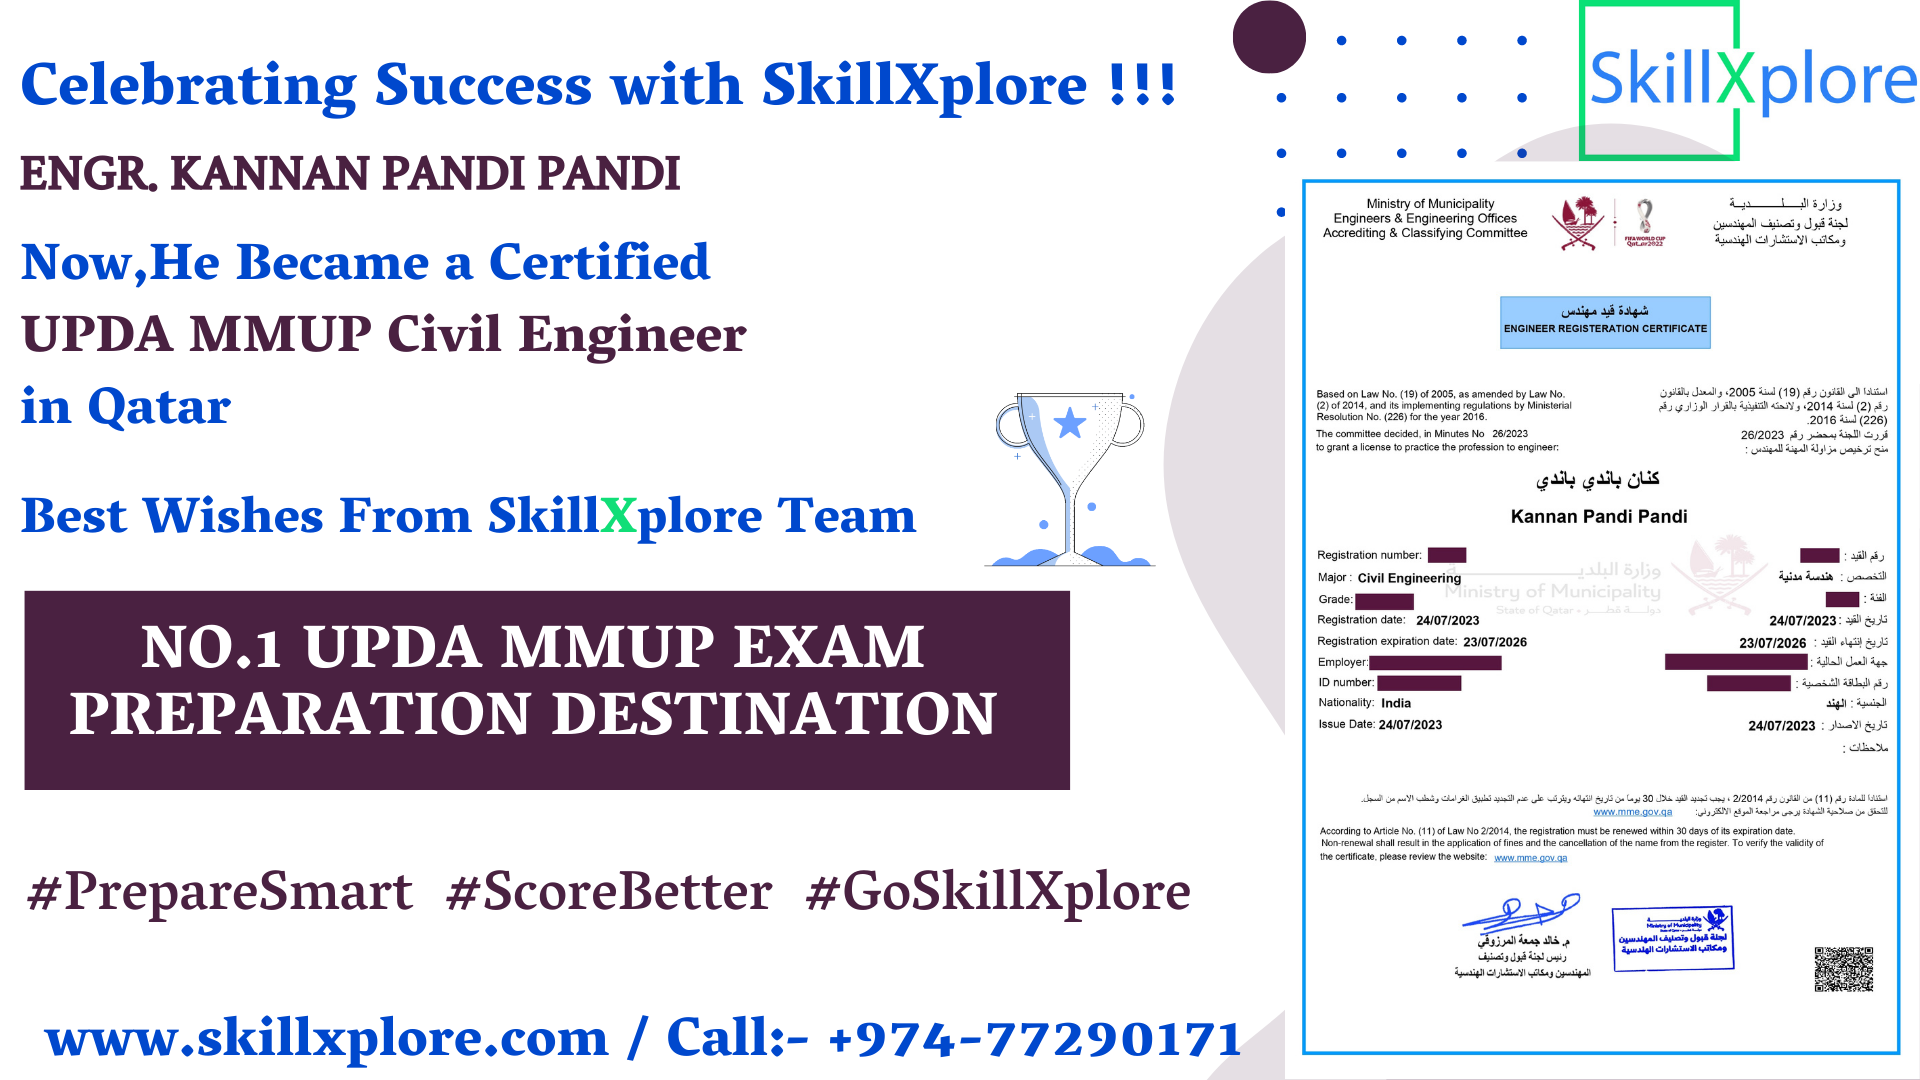 How to apply for MMUP Exam in Qatar